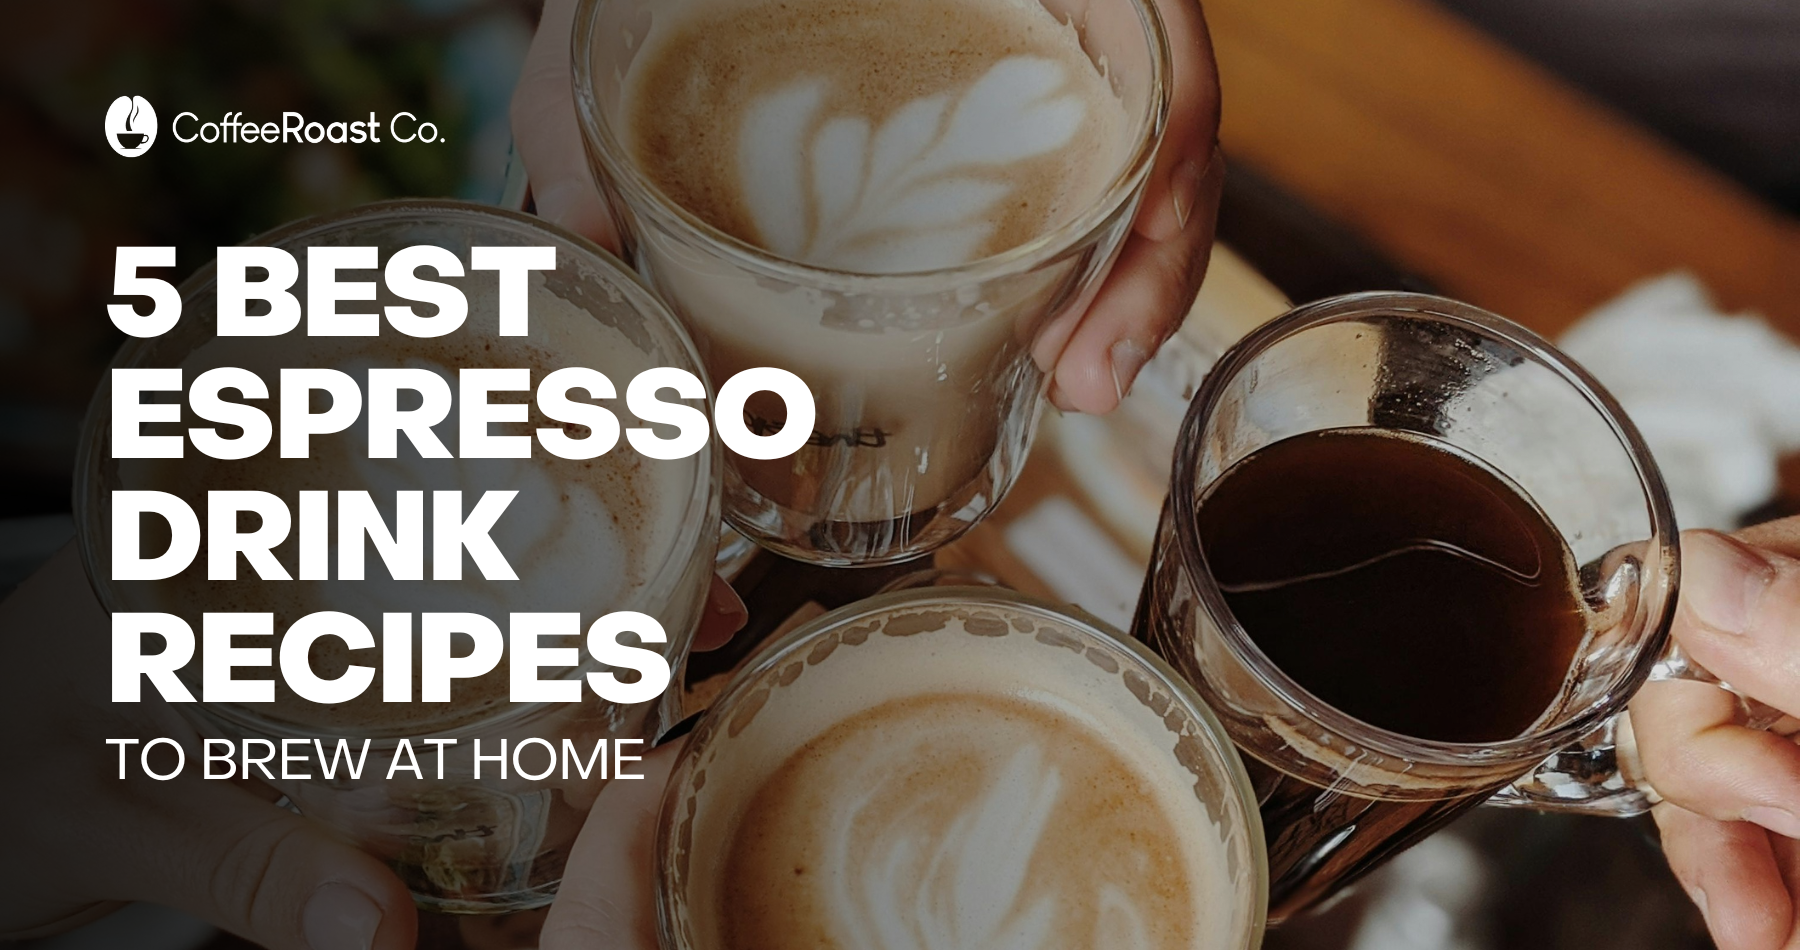 5 Best Espresso Drink Recipes to Brew at Home